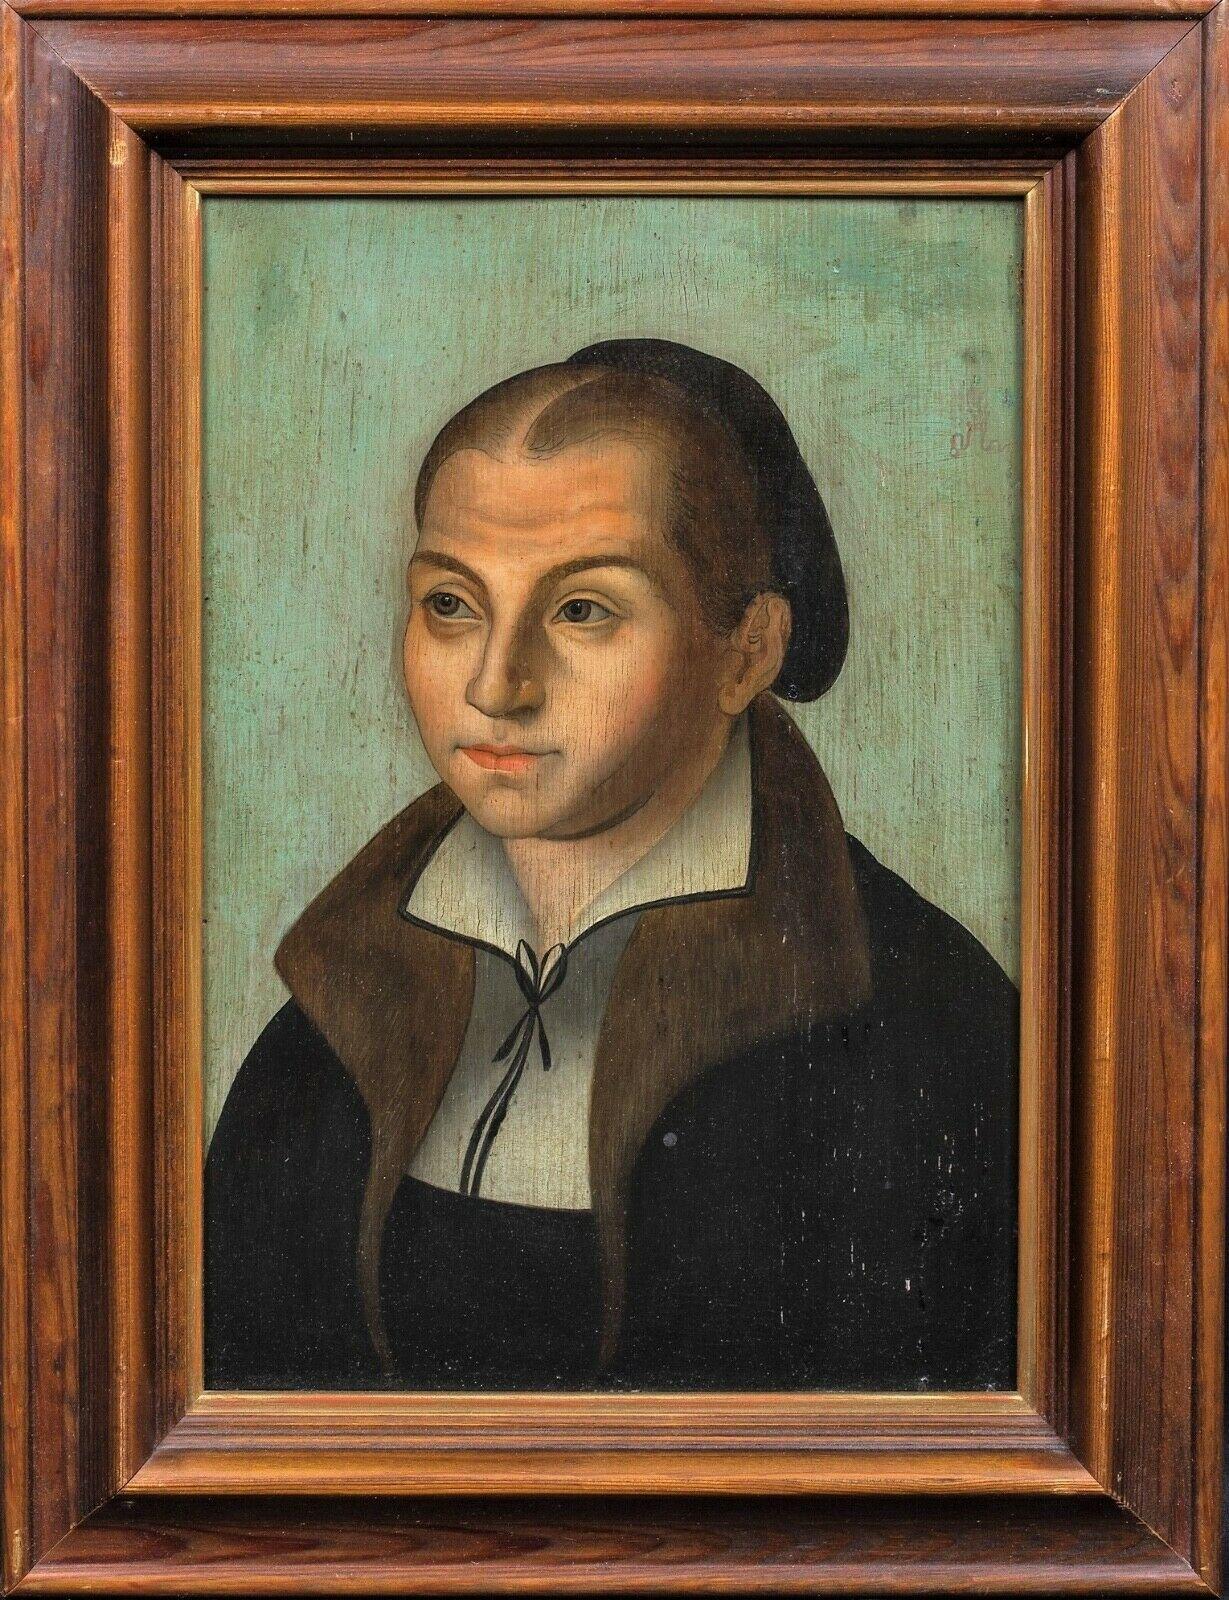 Portrait Of  The Wife Of Martin Luther (1483-1546), 16th Century - Painting by Lucas Cranach the Elder